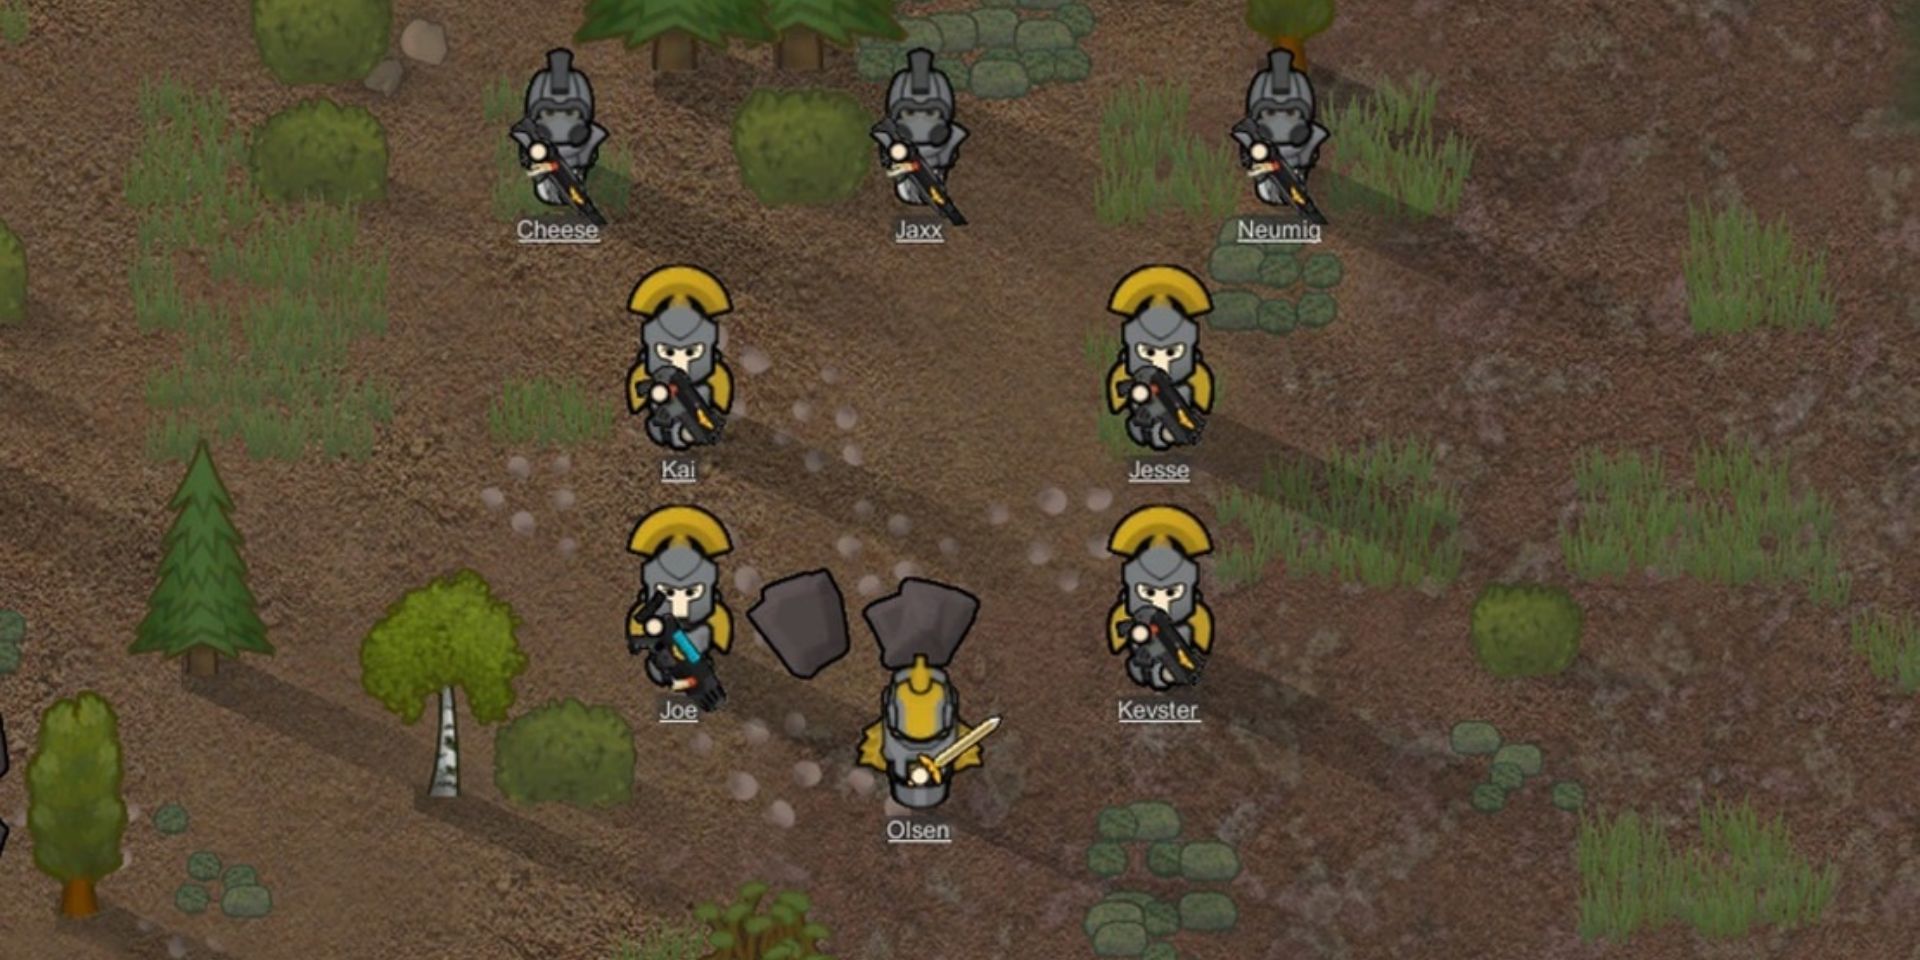 A formation of soldiers in Warhammer 40.000